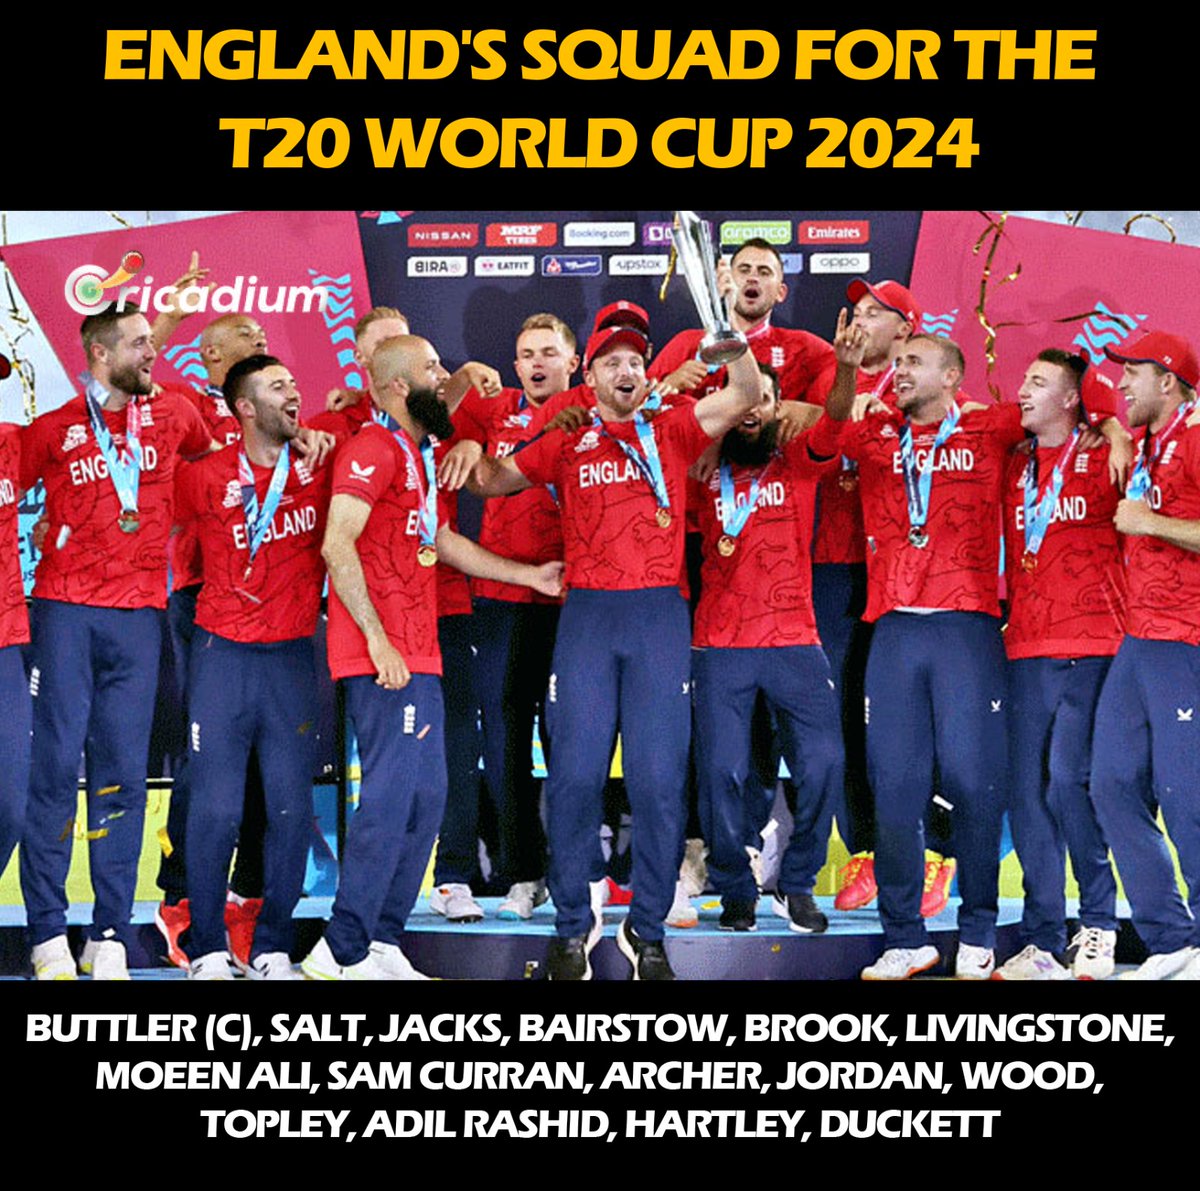 England have announced their 15-player provisional squad for the T20 World Cup! 🏴󠁧󠁢󠁥󠁮󠁧󠁿

#JosButtler #JonnyBairstow #WillJacks #LiamLivingstone #PhilSalt #JofraArcher #England #EnglandCricket #EnglandCricketTeam